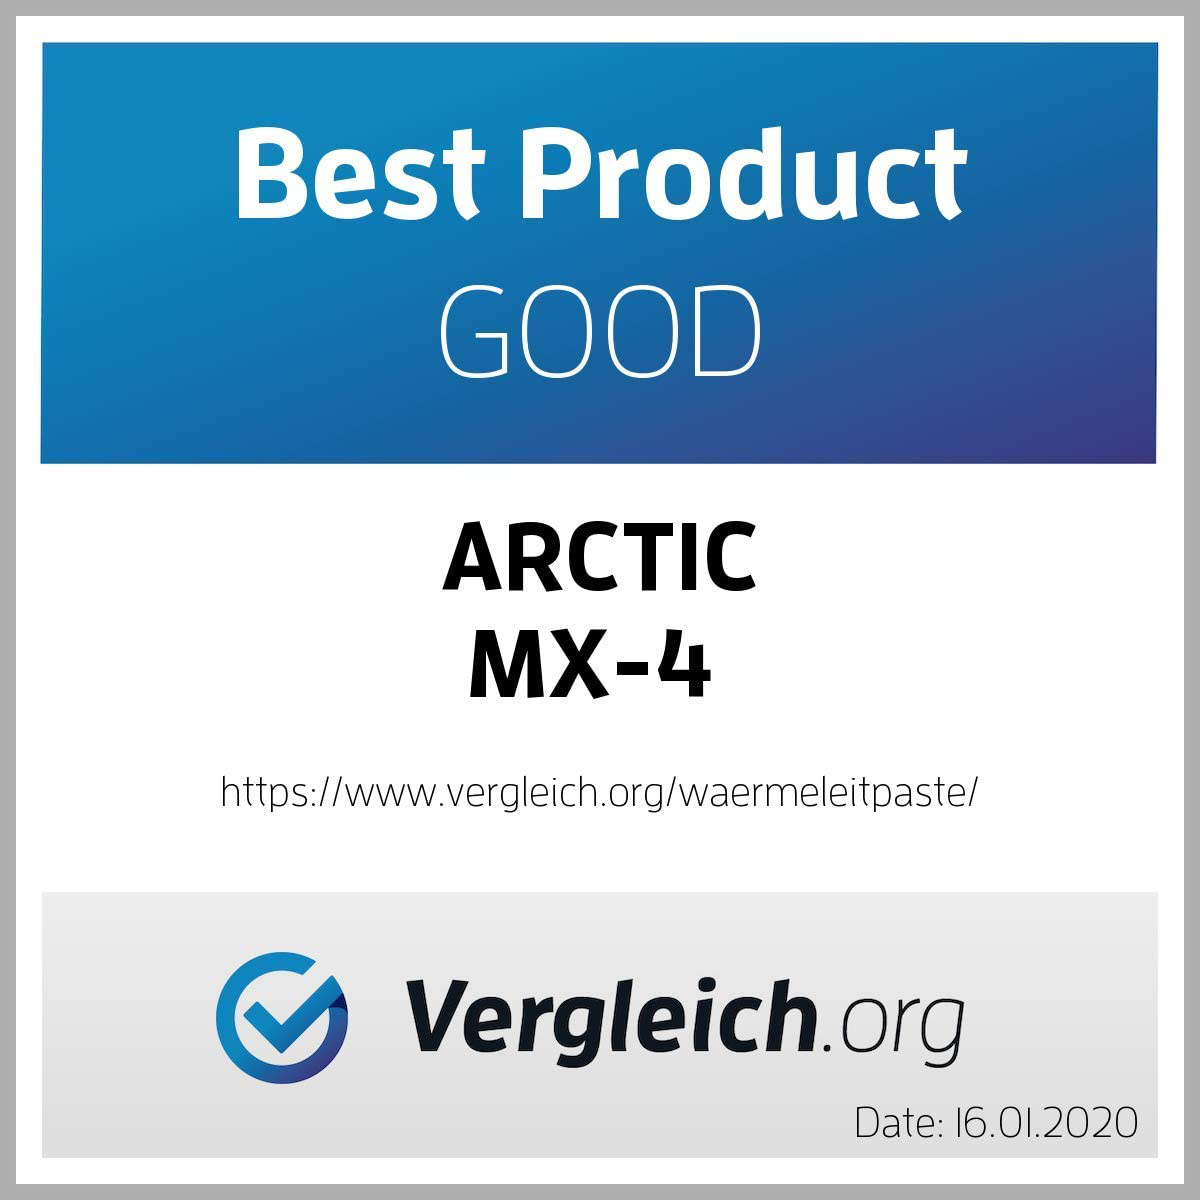 ARCTIC MX-4 (20 G) - Premium Performance Thermal Paste for All Processors (CPU, GPU - PC, PS4, XBOX), Very High Thermal Conductivity, Long Durability, Safe Application, Non-Conductive, Non-Capacitive